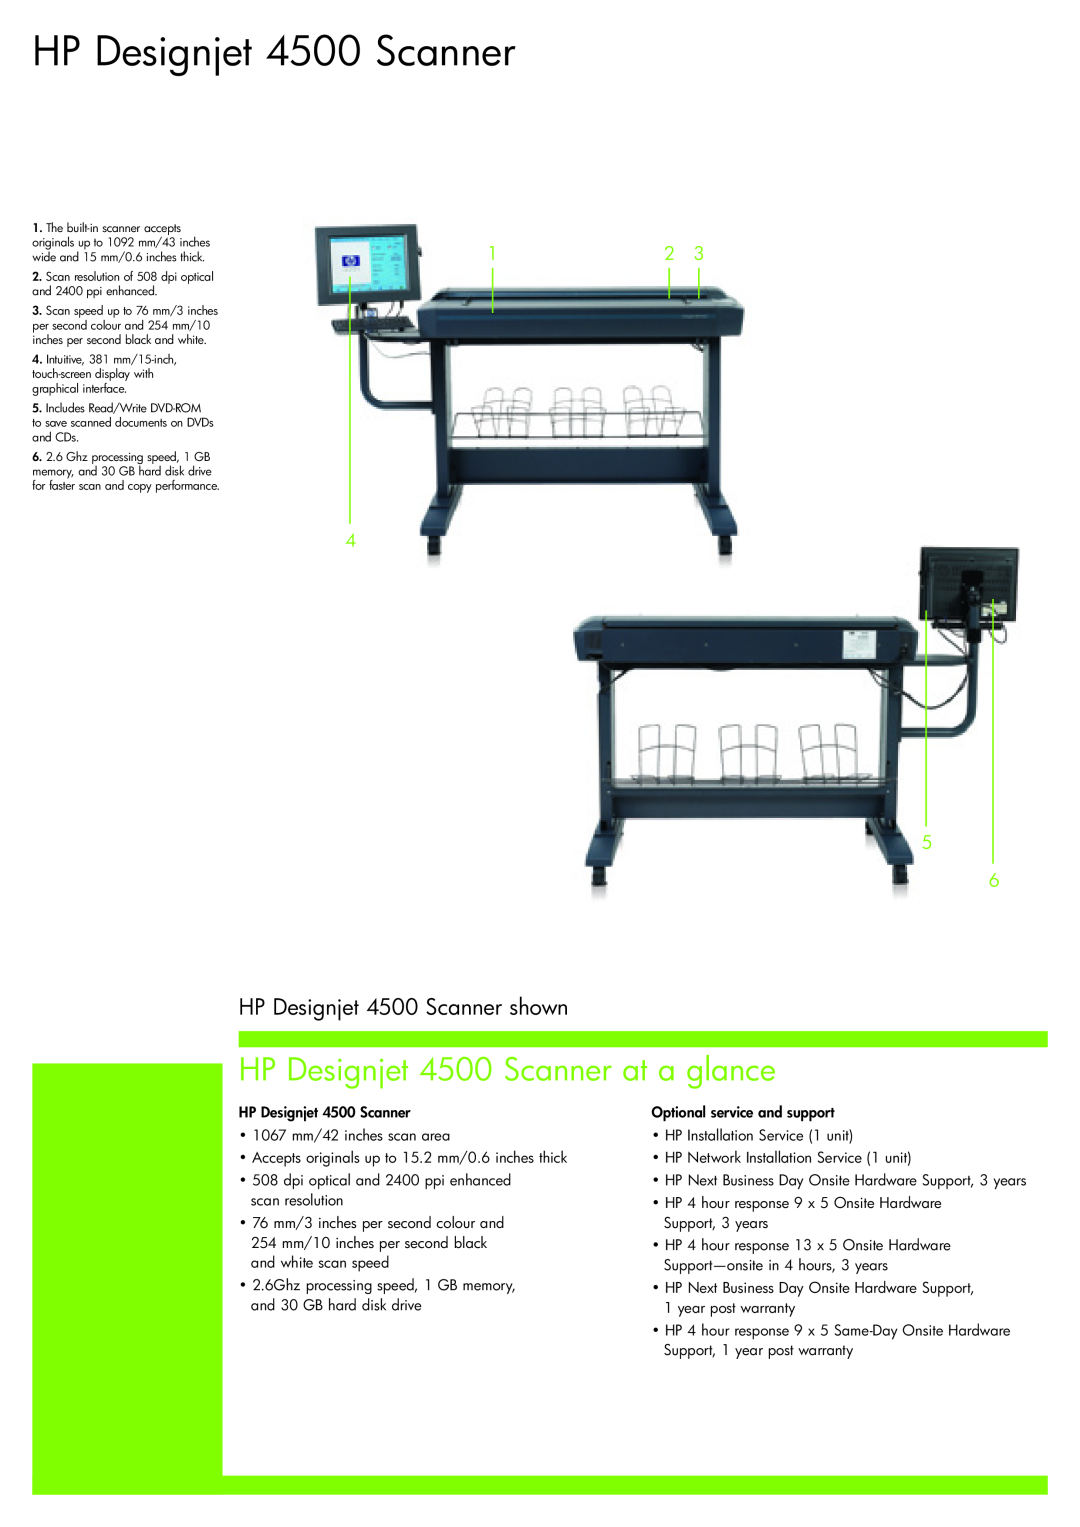 Cambo manual HP Designjet 4500 Scanner at a glance, HP Designjet 4500 Scanner shown 